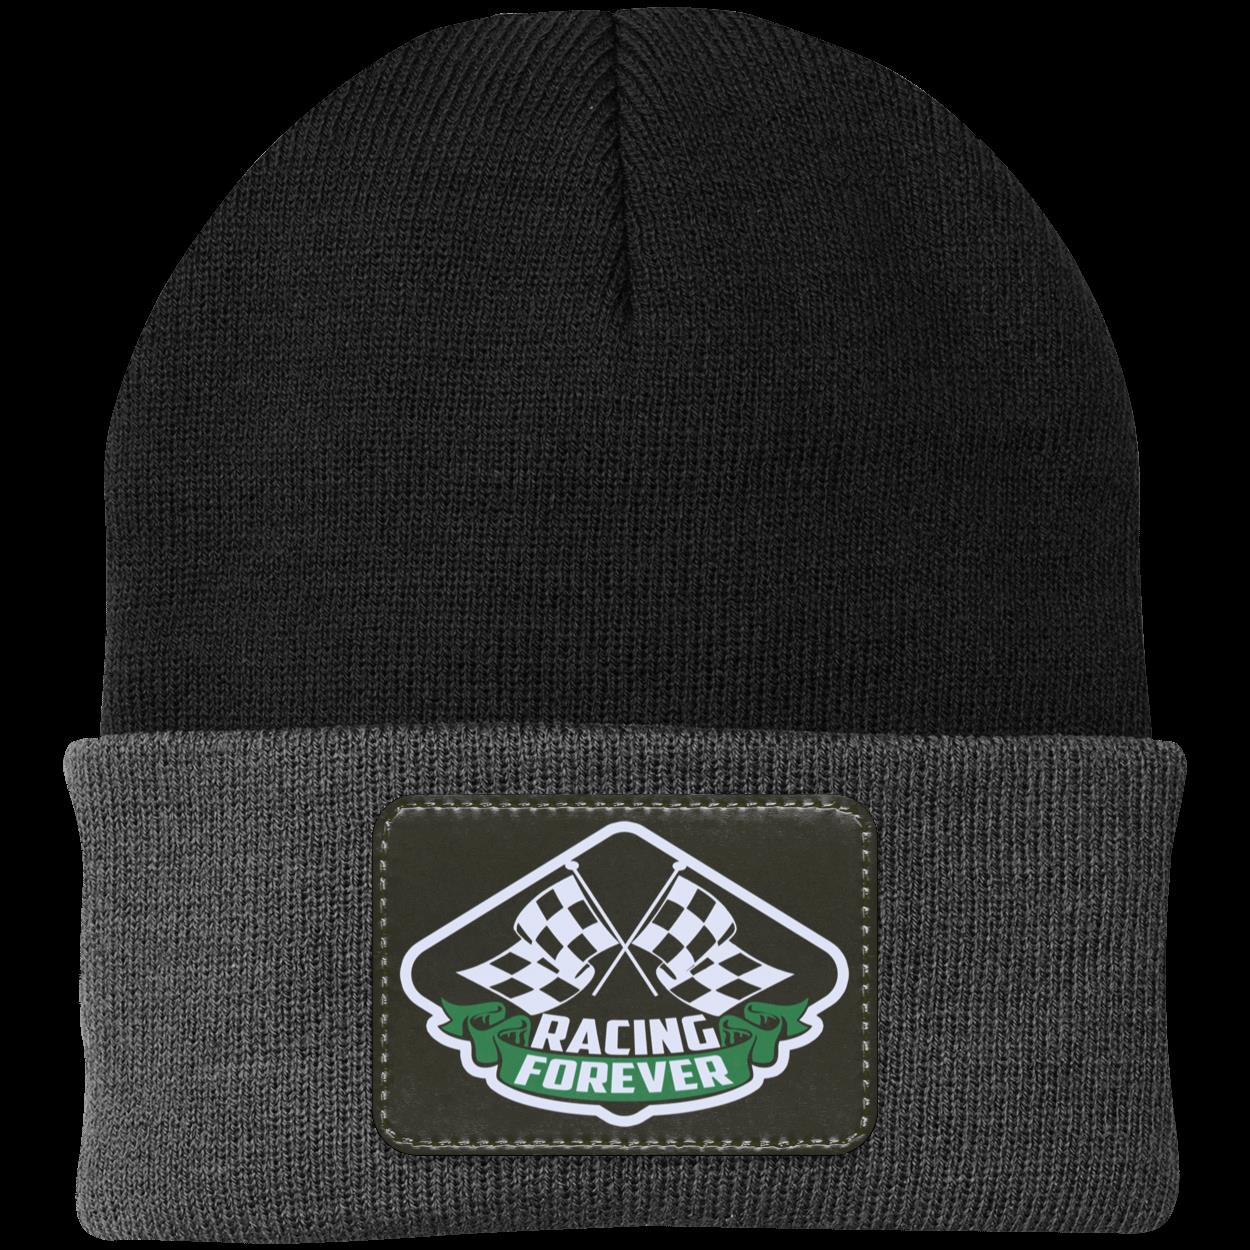 Racing Forever Patched Knit Cap V1